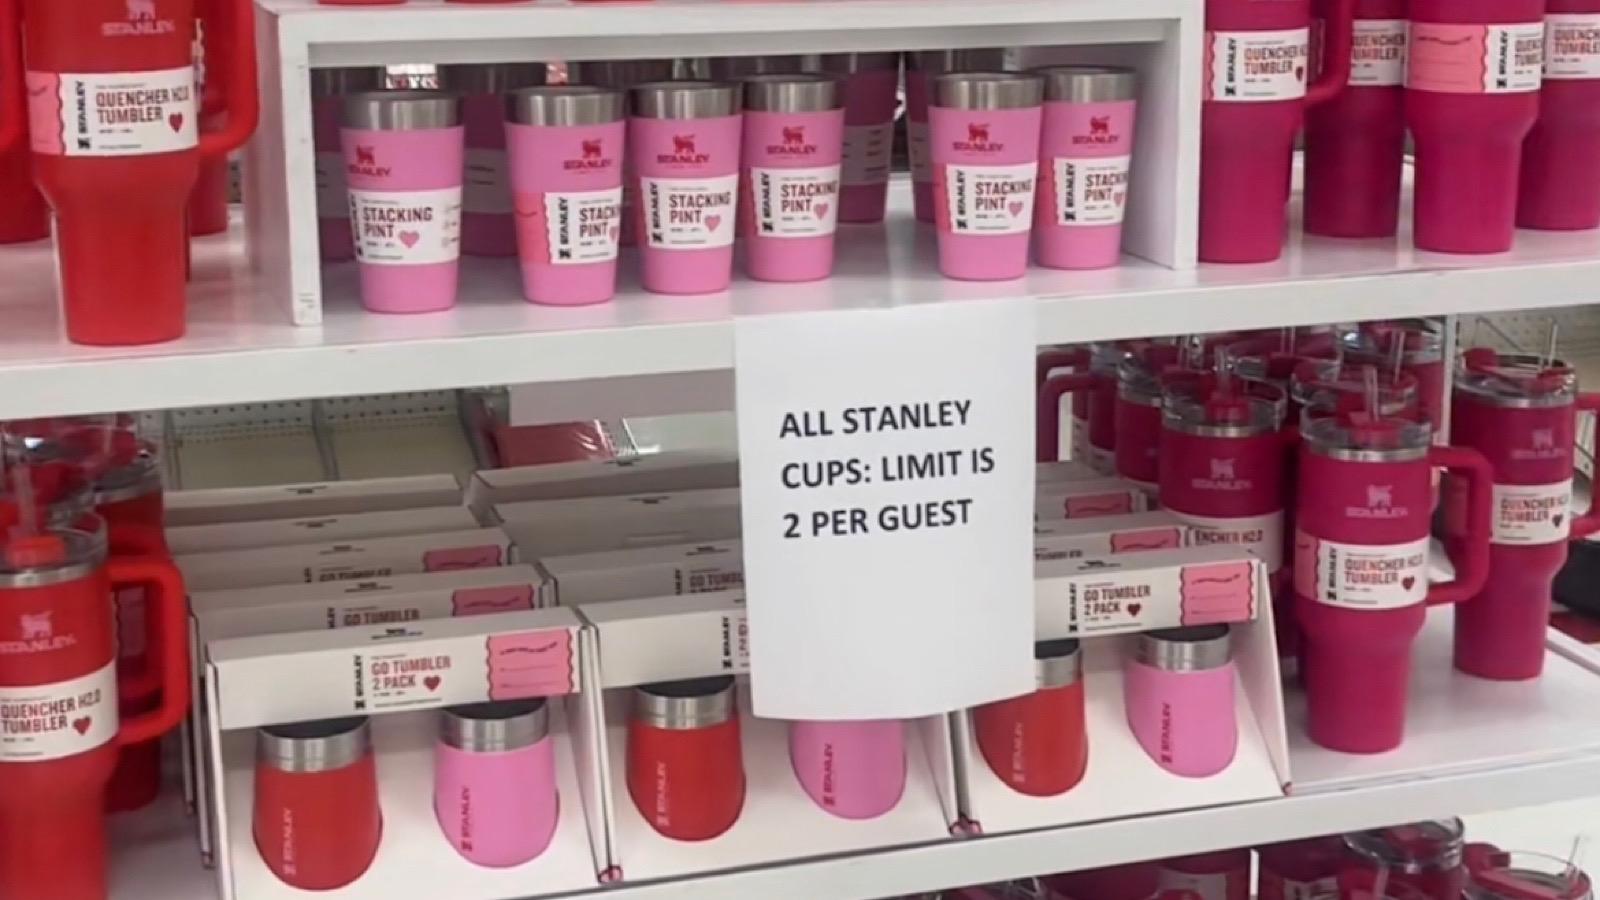 Stanley and Target teamed up to launch new Quenchers